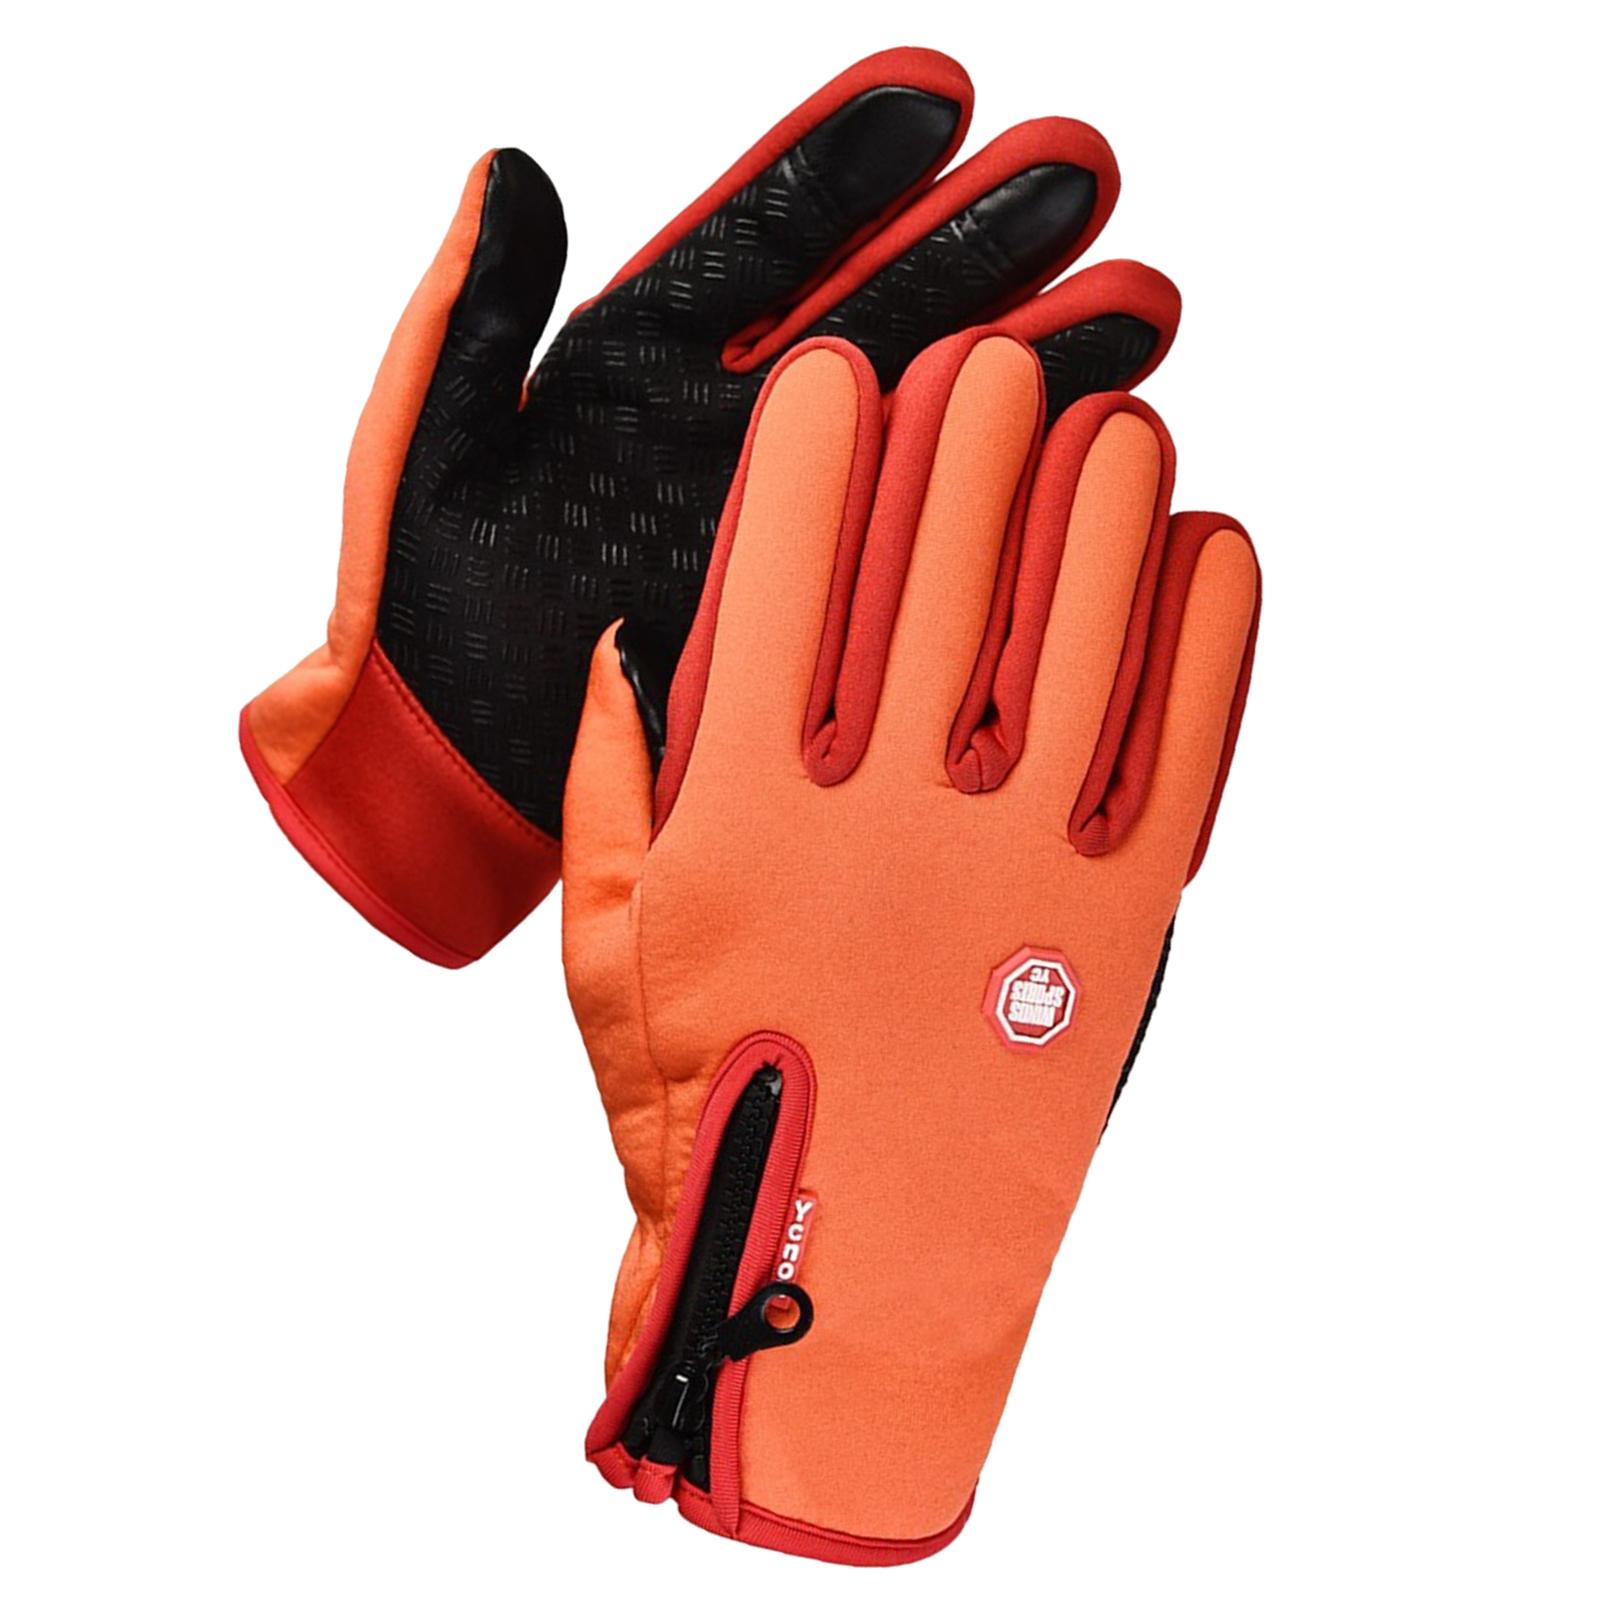 Winter Gloves Nonslip Thermal Gloves for Outdoor Running Sports Motorcycle XL Orange